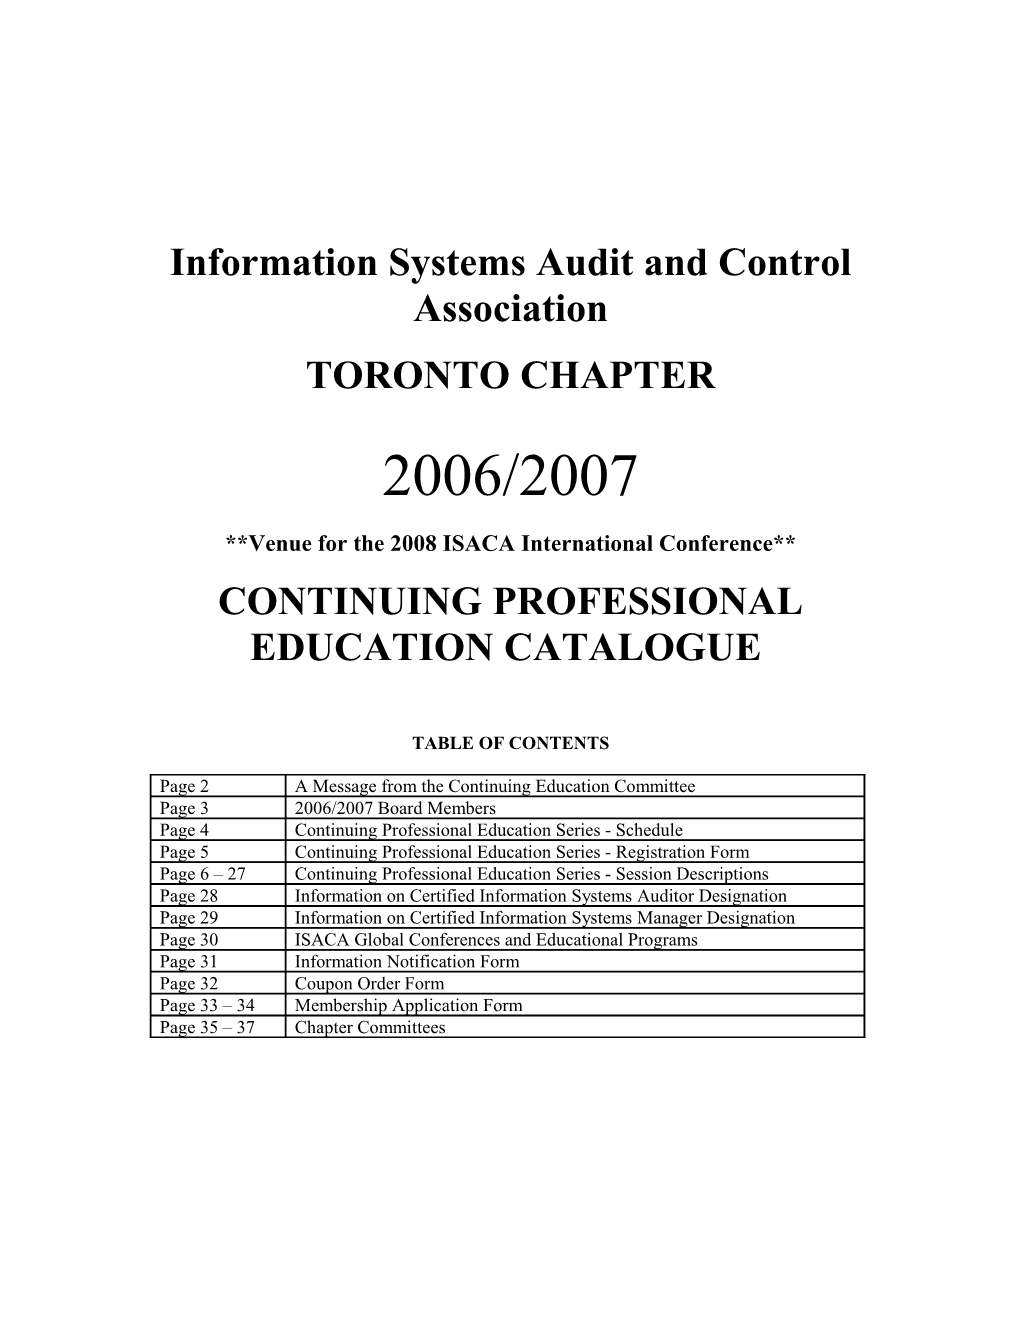 ISACA - Toronto Chapter 2006/2007 Continuing Professional Education